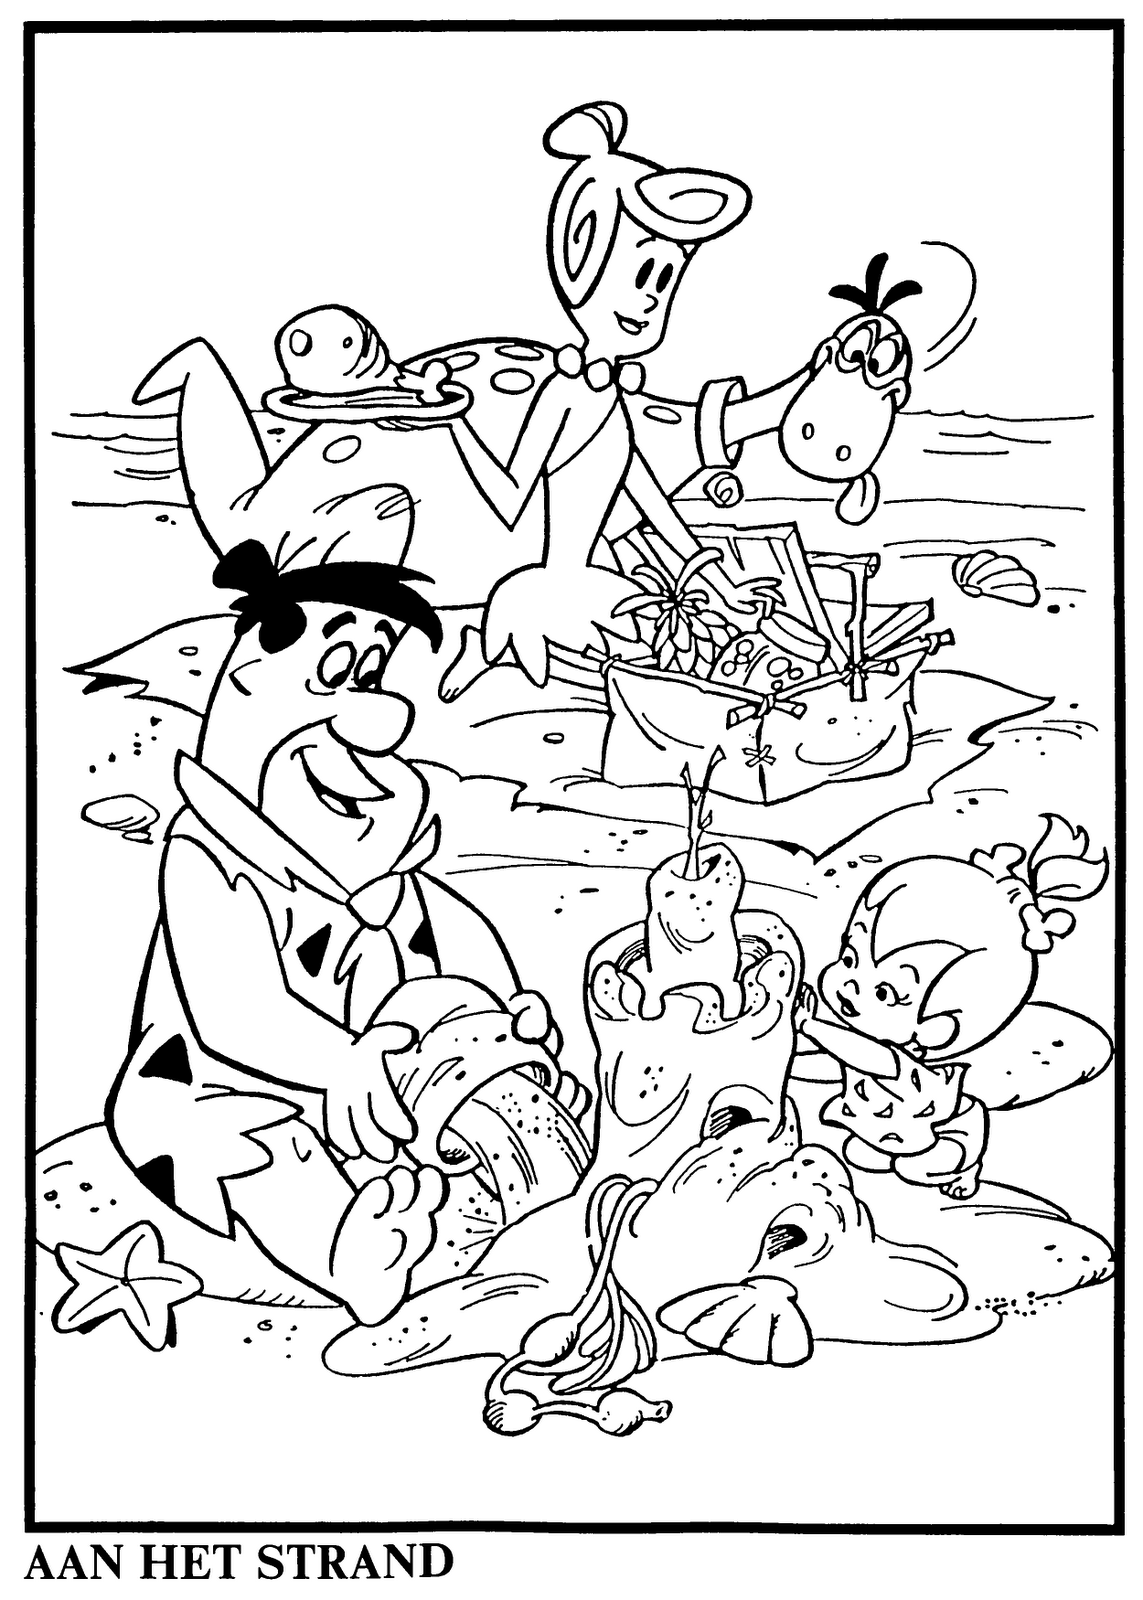 Flintstones Coloring Book - Coloring Pages for Kids and for Adults